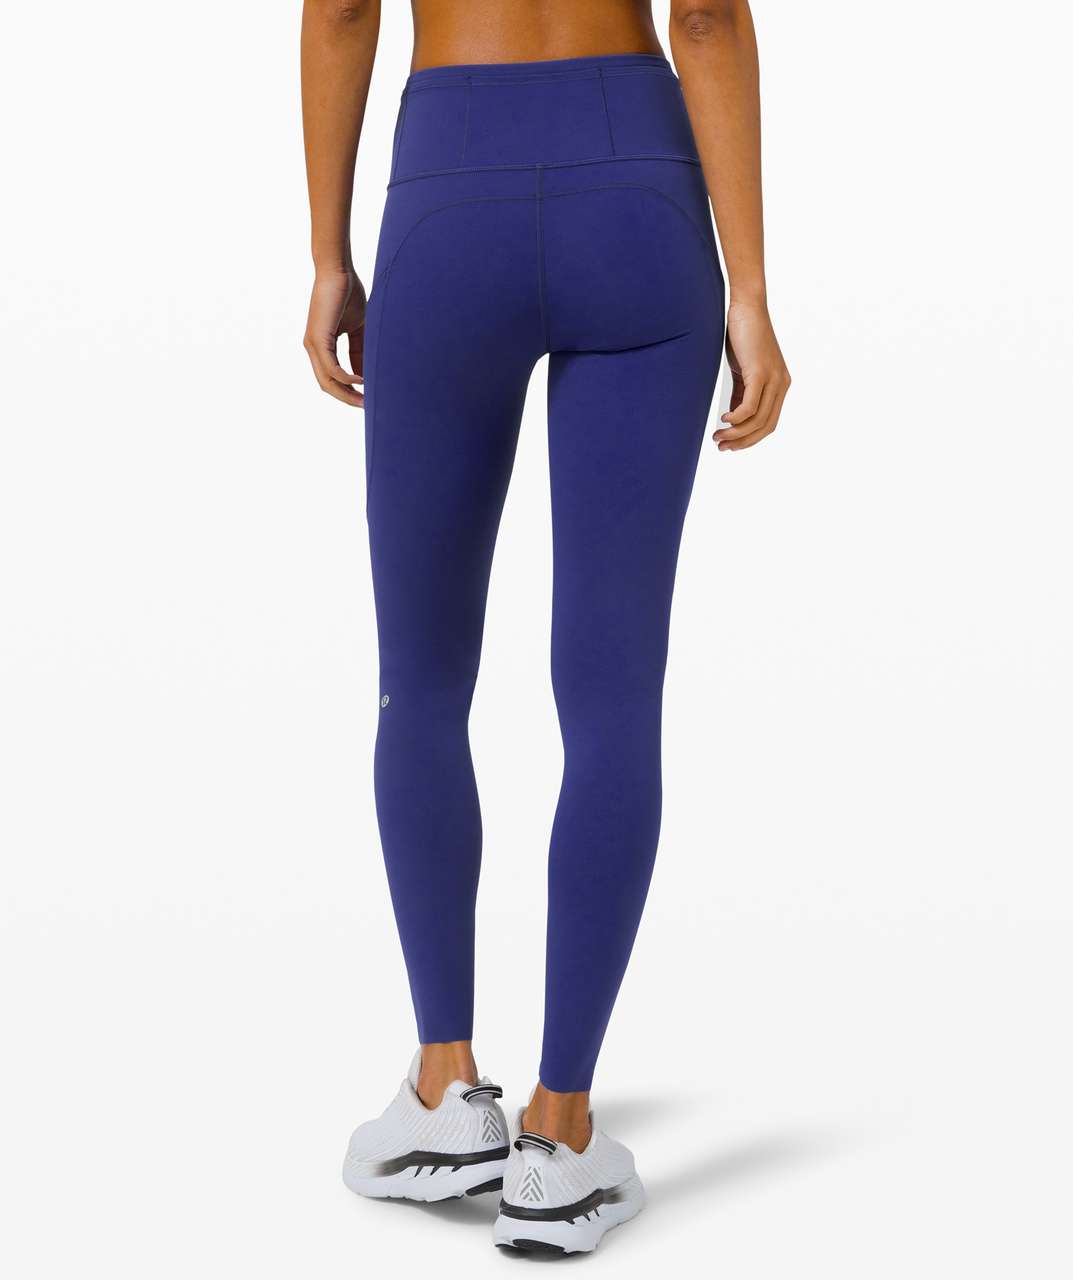 Lululemon Fast and Free Tight 28" *Non-Reflective - Larkspur